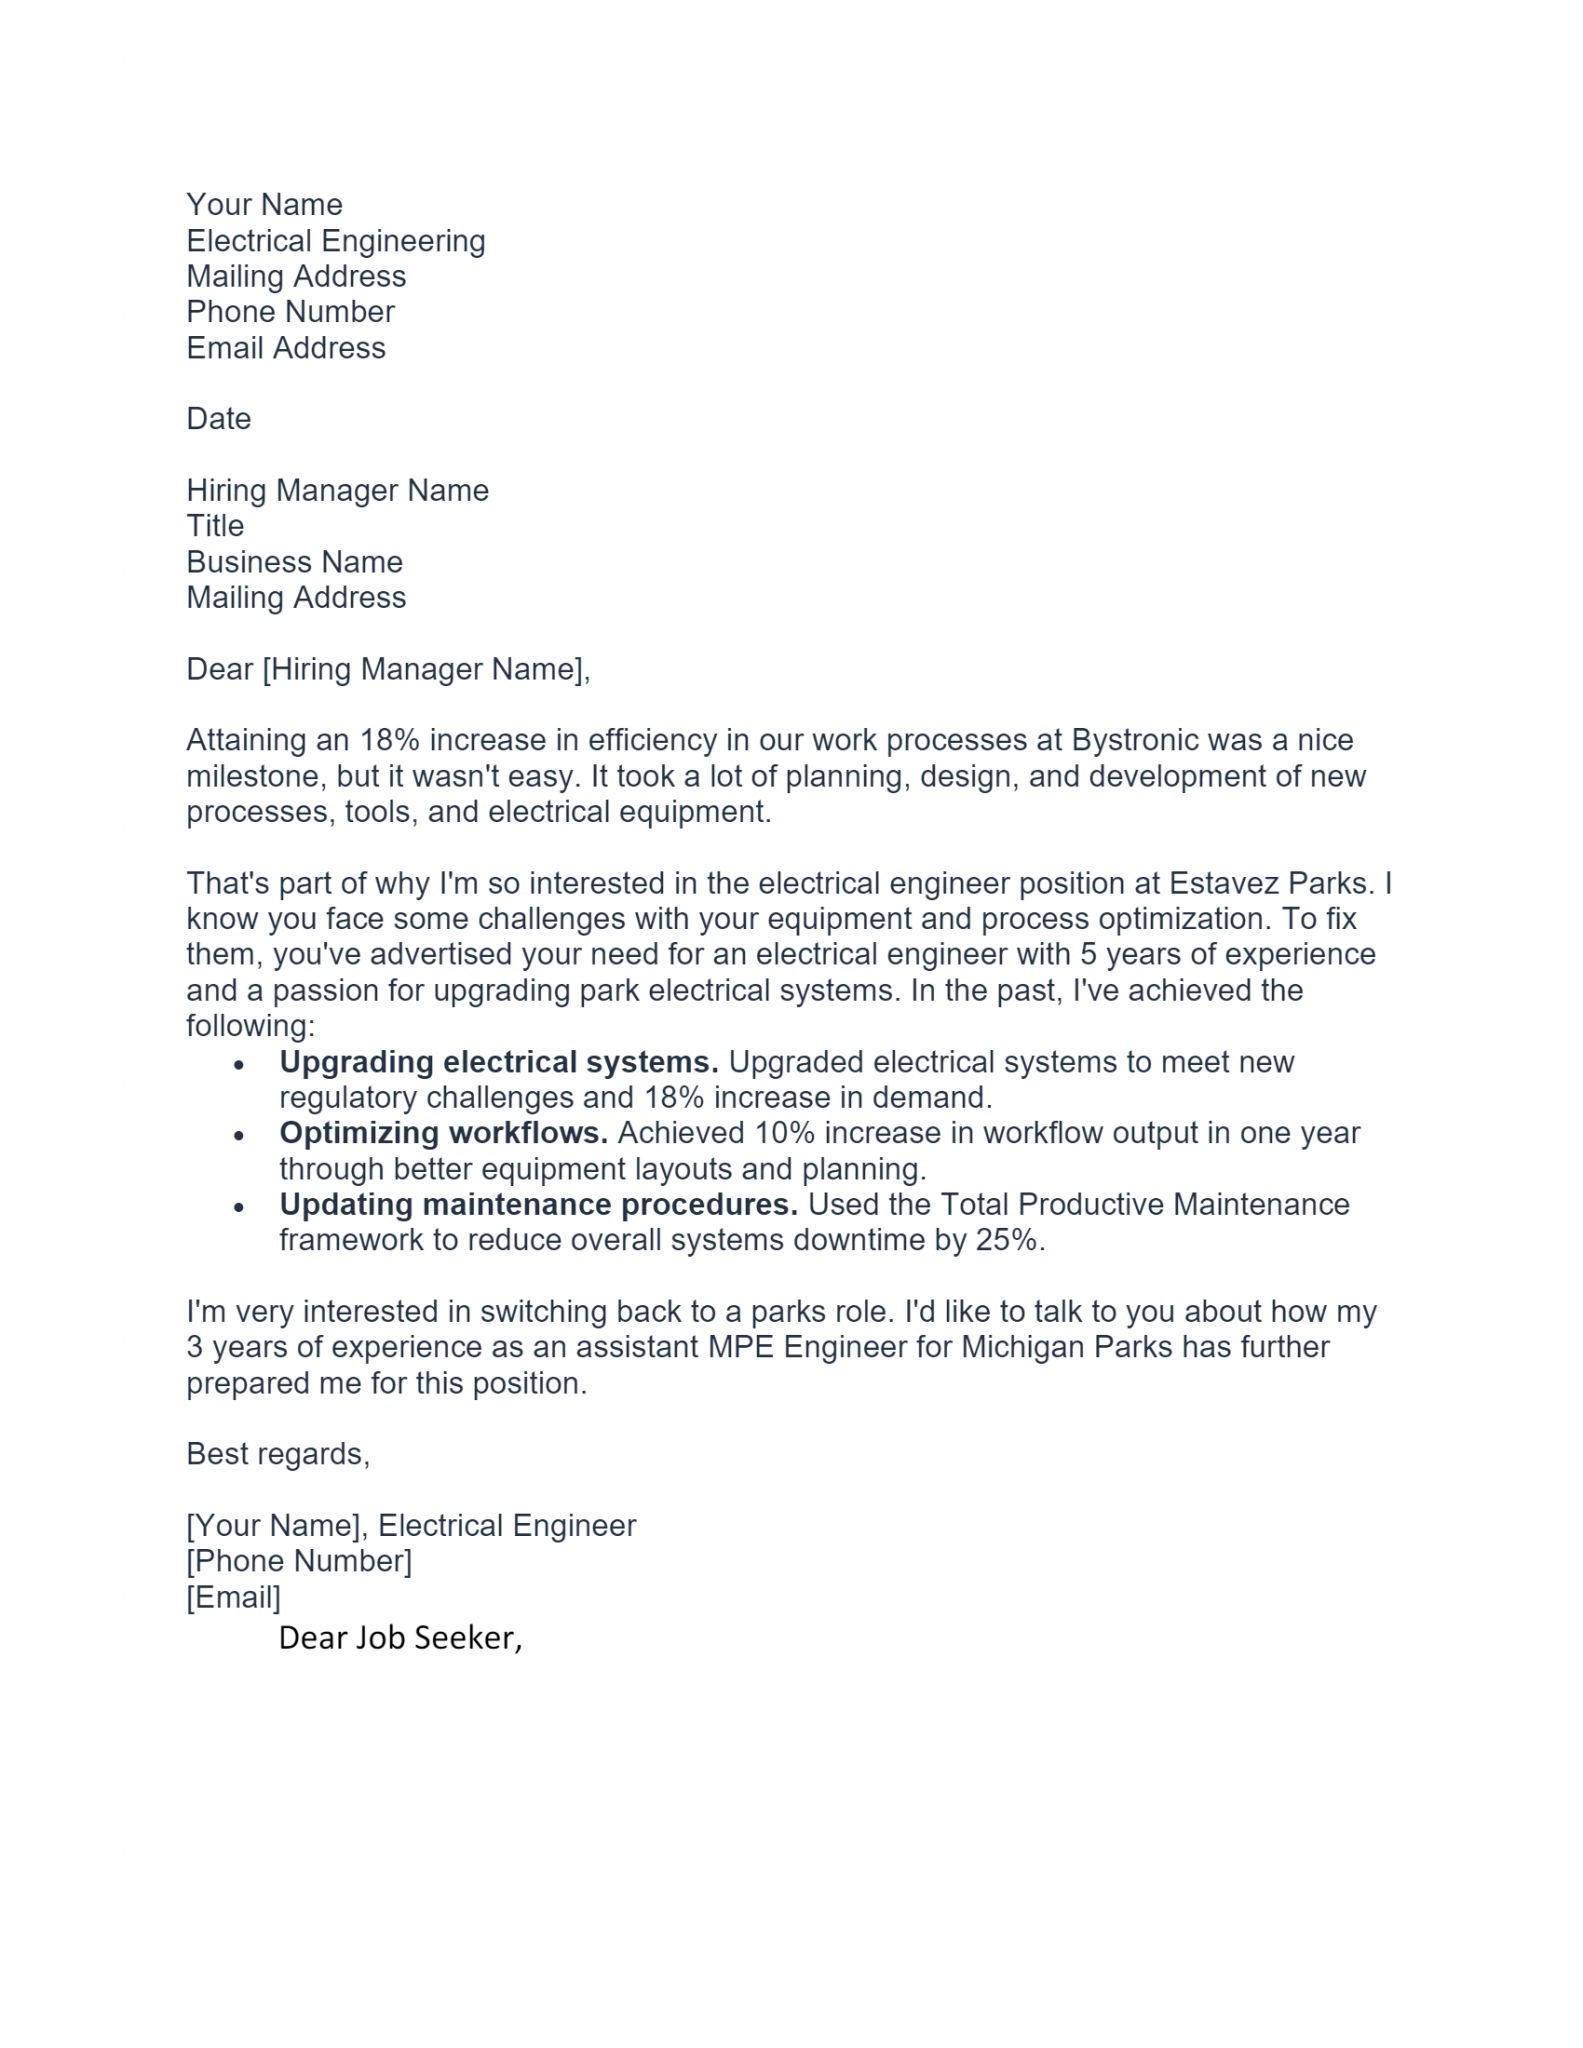 application letter of an electrical engineer